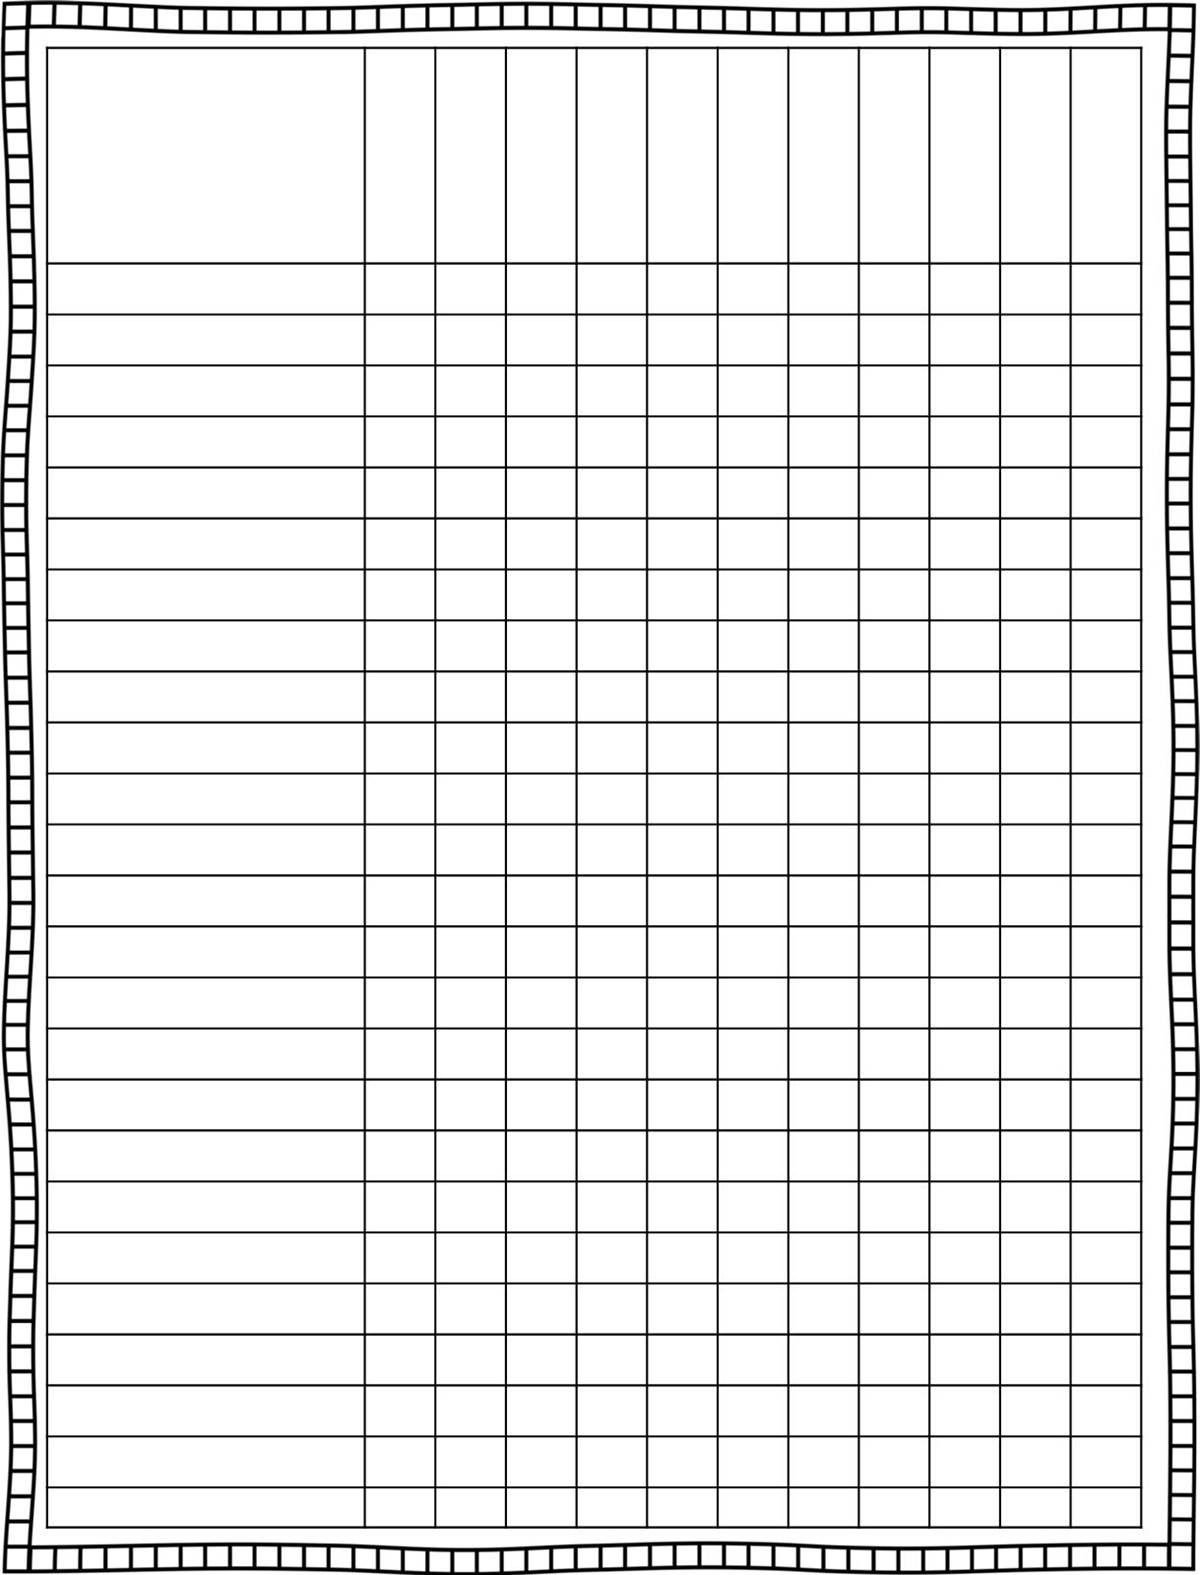 6-best-images-of-individual-grade-sheets-templates-printable-class